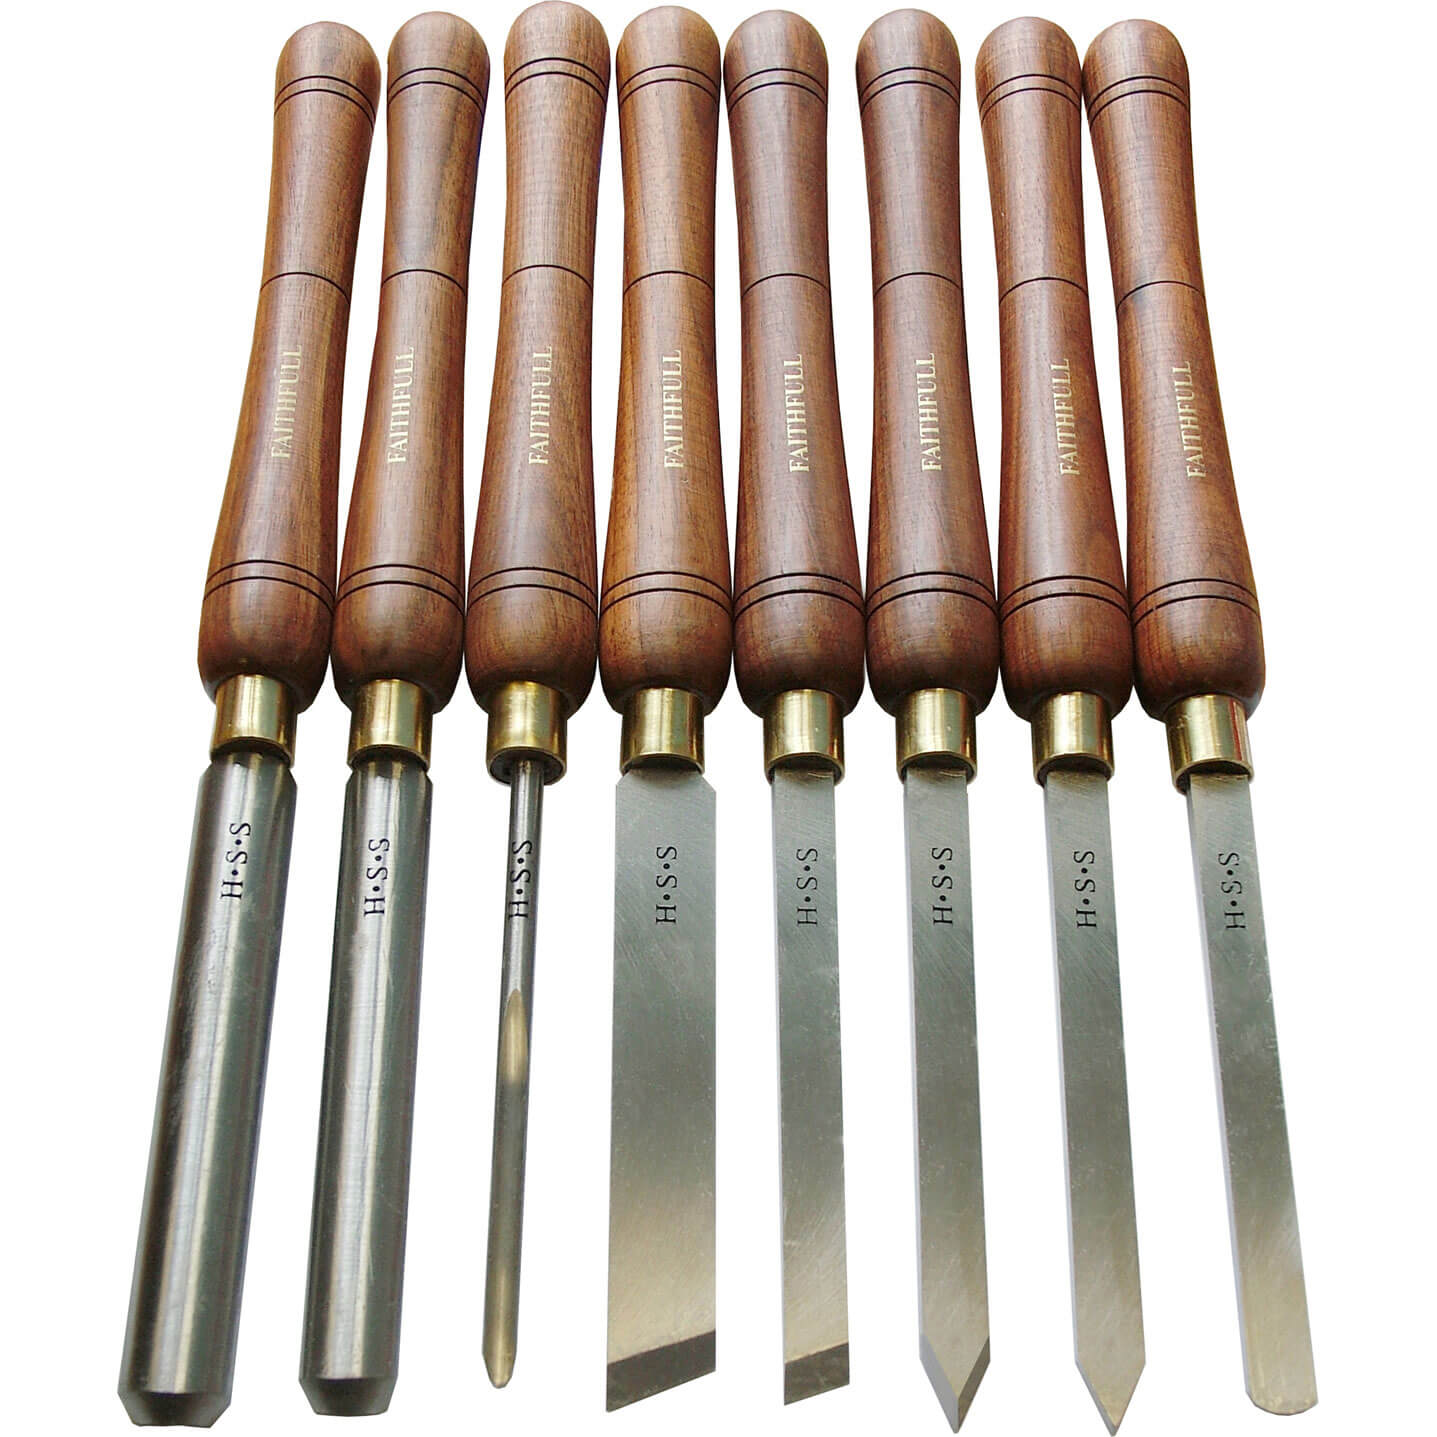 Faithfull 8 Piece High Speed Steel Turning Chisel Set in a Wooden Boxed